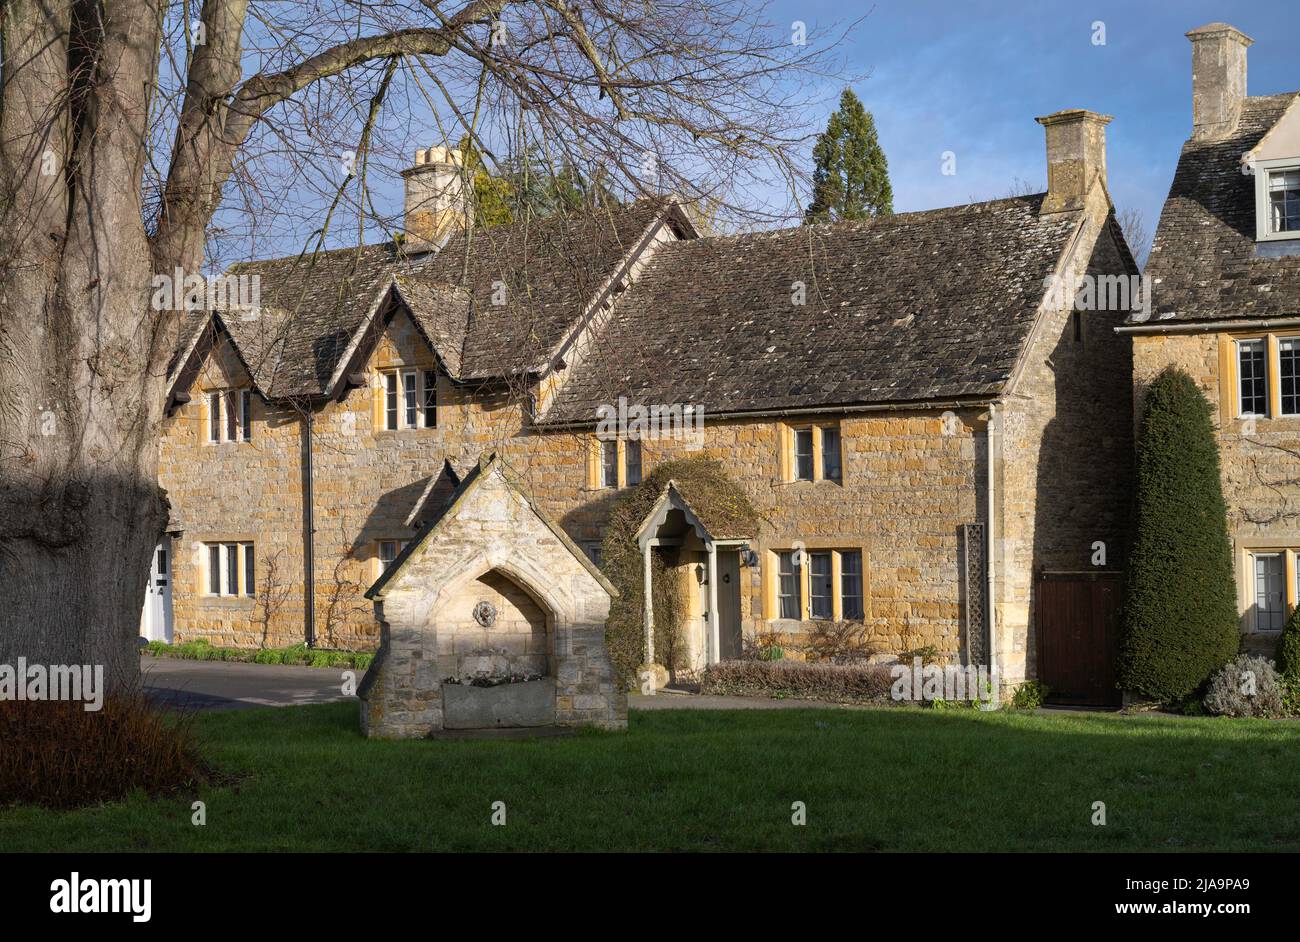 Lower Slaughter, Cotswolds, Gloucestershire, England. Stockfoto